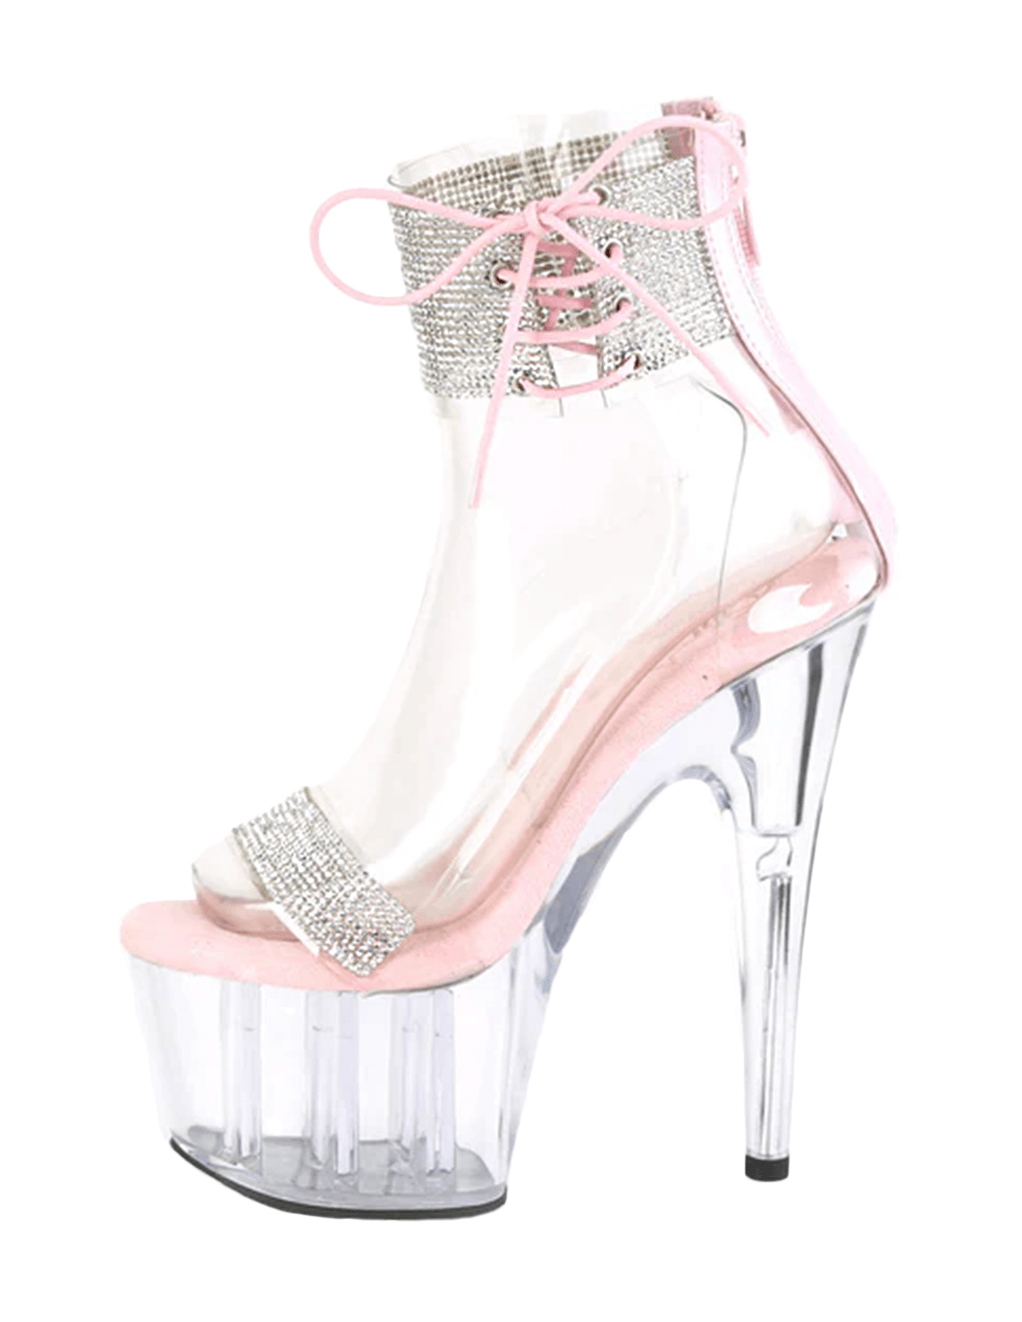 Pleaser Adore 727RS Rhinestone Ankle Cuff Platform Sandal - Clear/Pink - Side